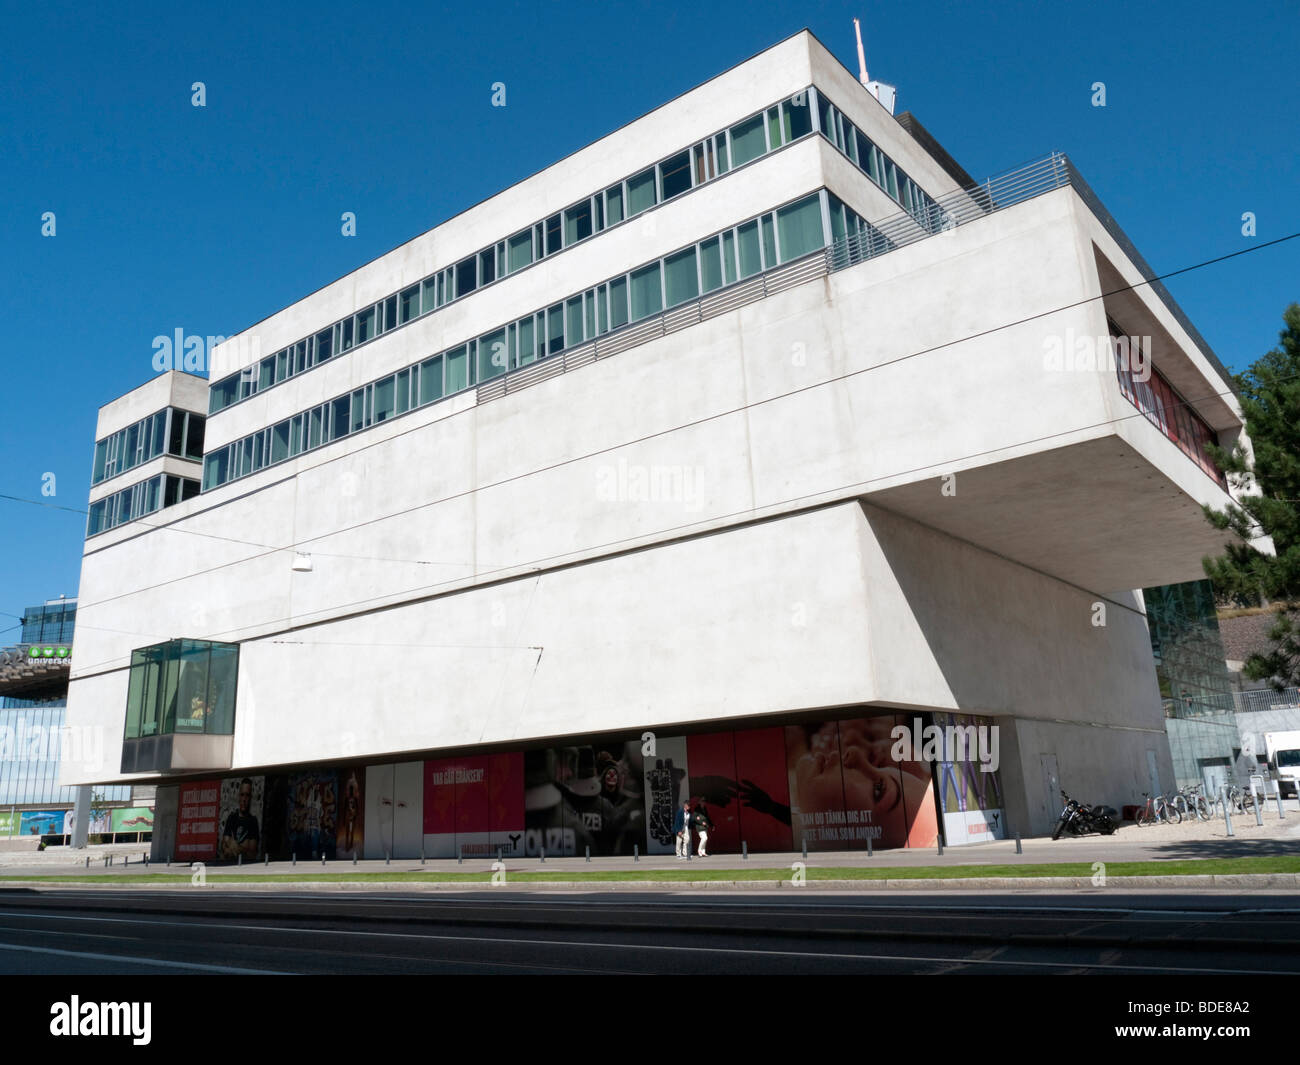 Exterior view of new Varldskulturmuseet or World Cultures Museum in Gothenburg Sweden August 2009 Stock Photo